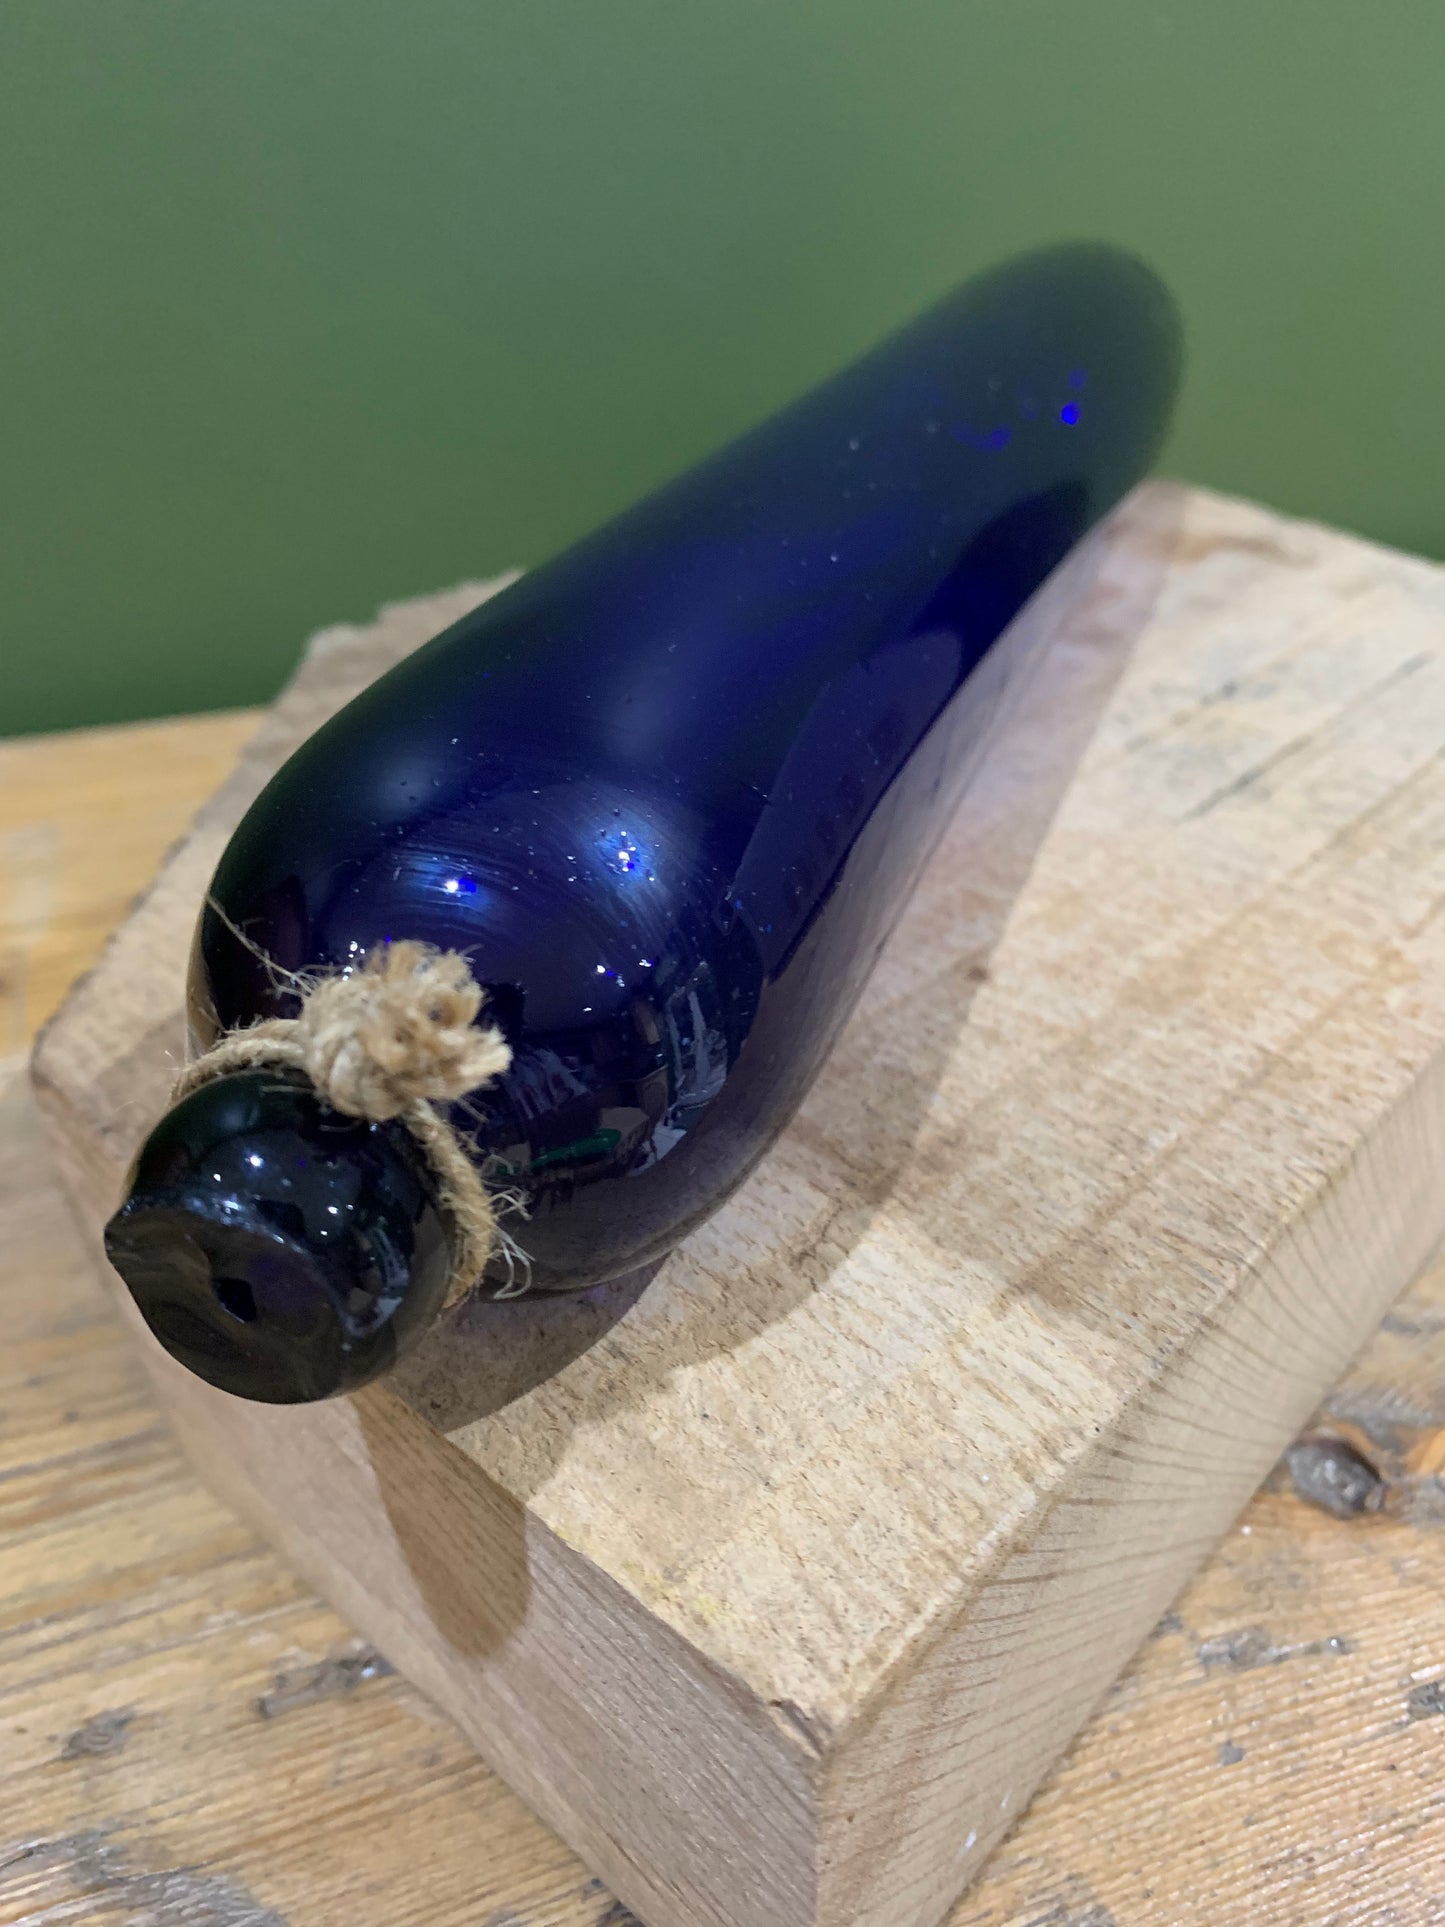 Preserving Victorian Heritage: The Blue Glass Rolling Pin